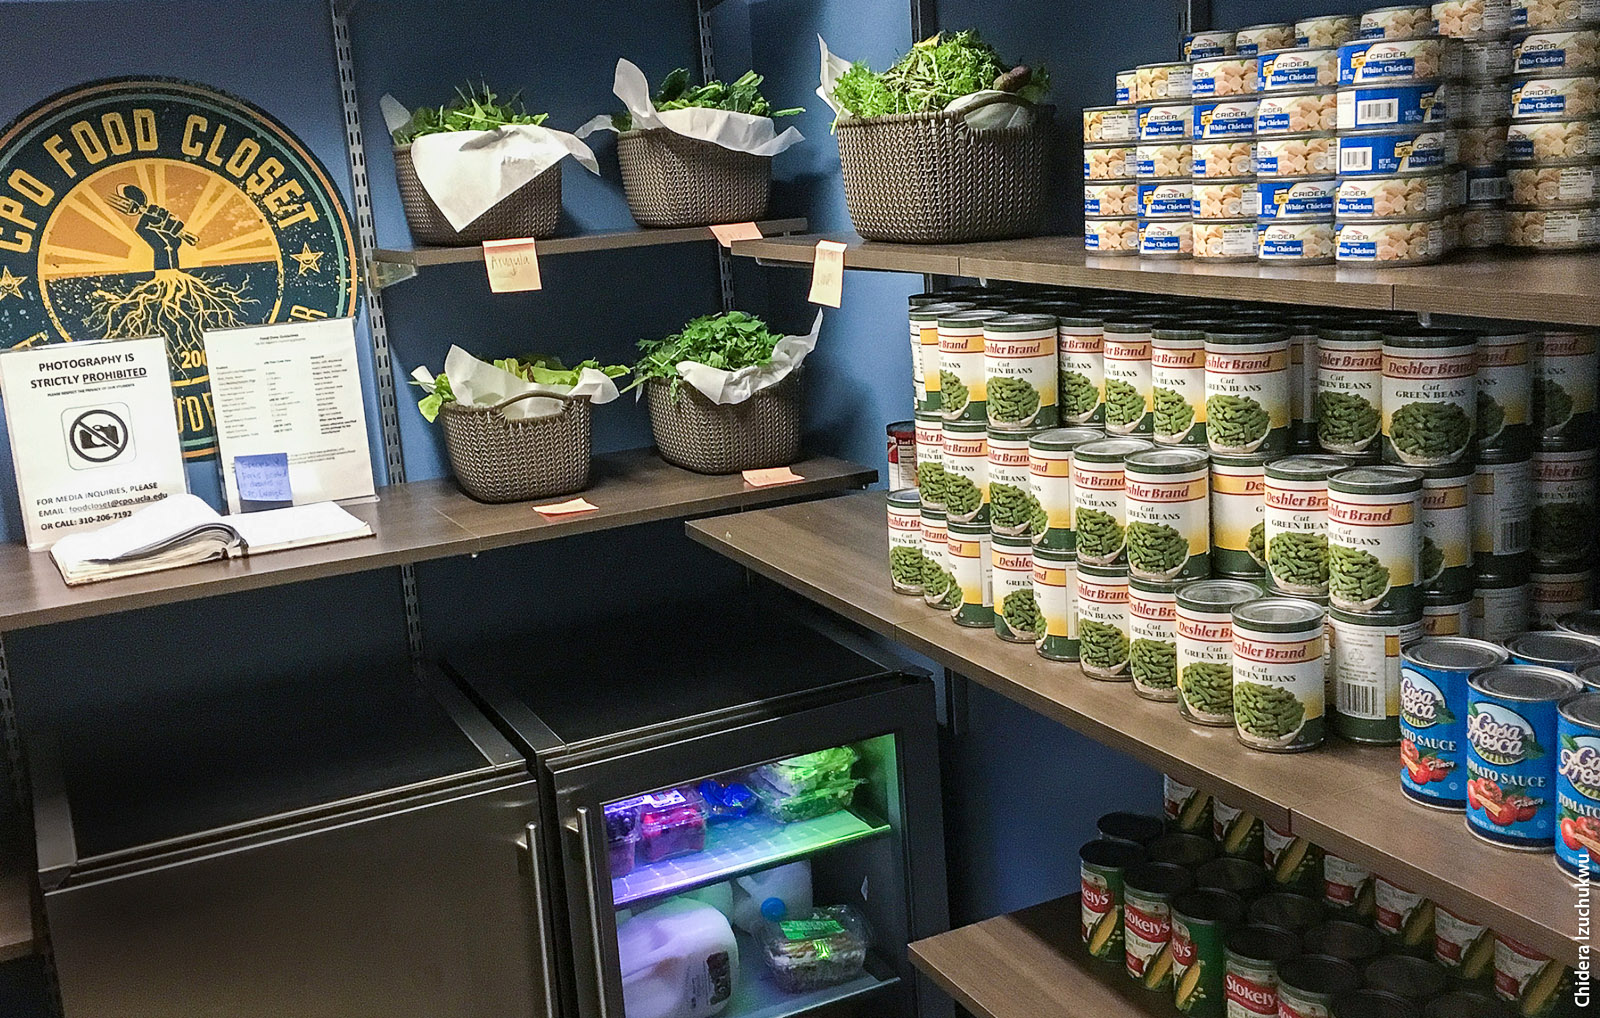 Students who had experienced food insecurity reported they often relied on campus free food resources. One such resource, the UCLA Community Programs Office Food Closet (above), takes food donations and provides free food to any UCLA student in need.